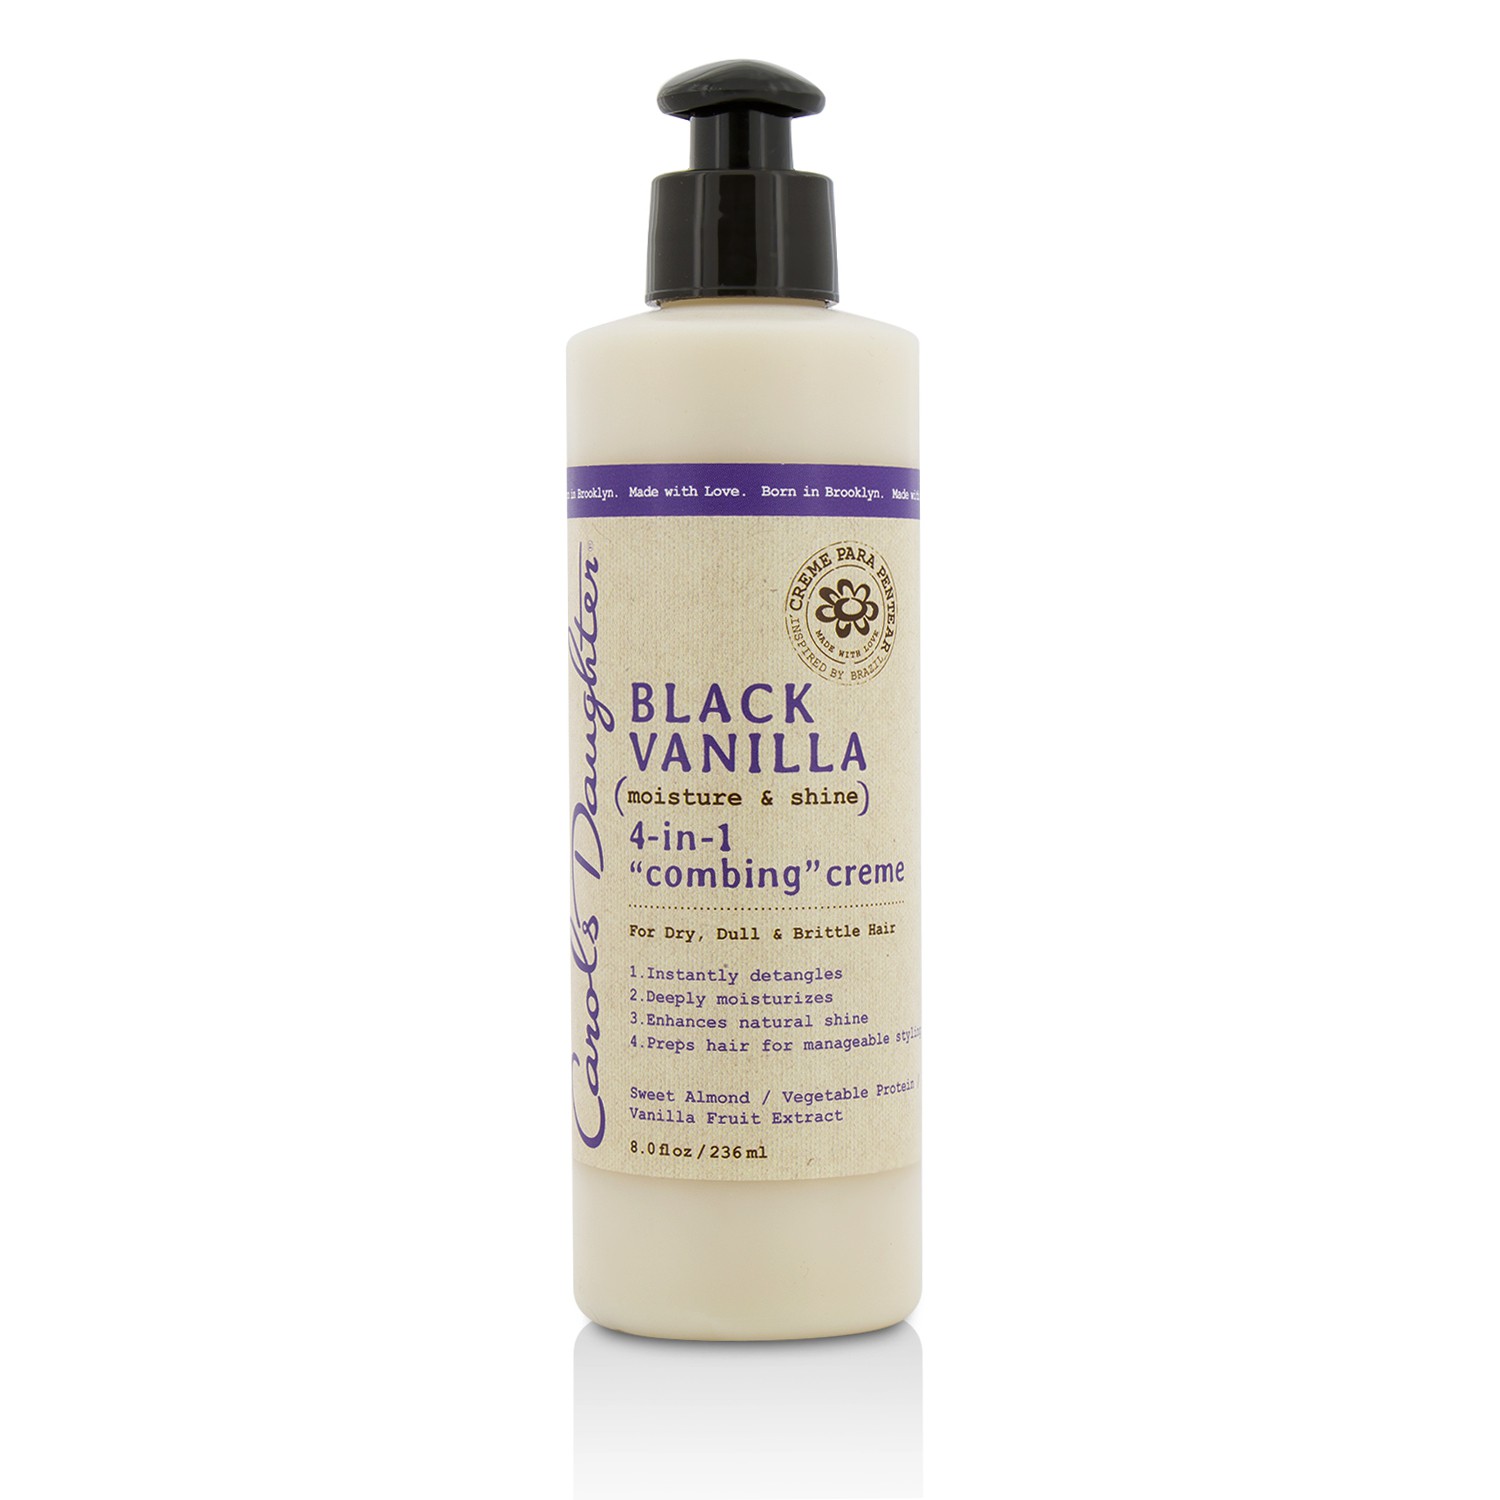 Black Vanilla Moisture & Shine 4-in-1 Combing Creme (For Dry Dull or Brittle Hair) Carols Daughter Image